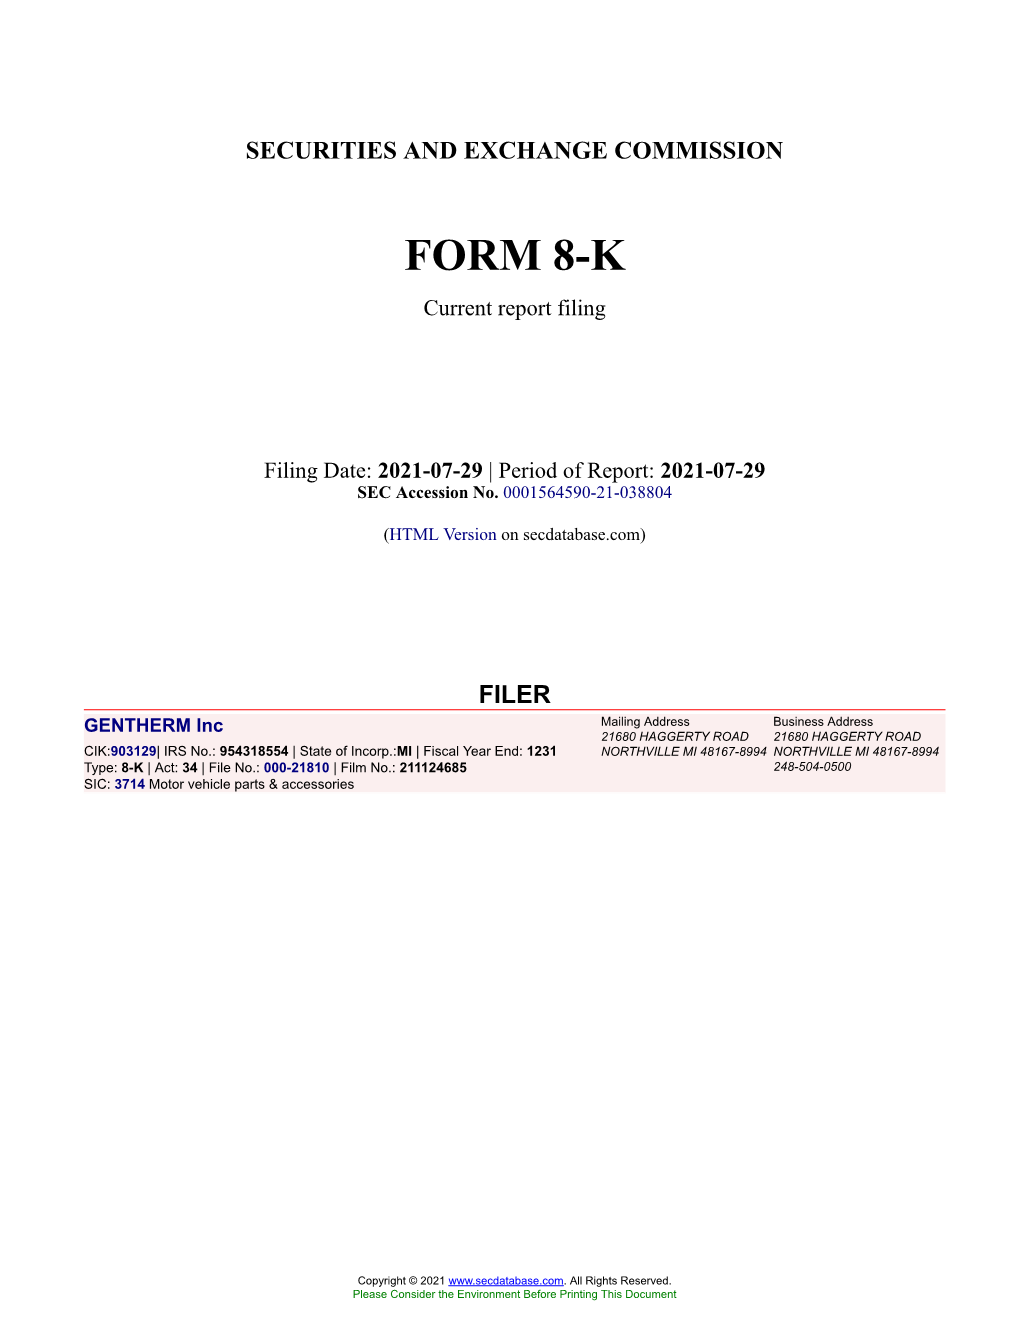 GENTHERM Inc Form 8-K Current Event Report Filed 2021-07-29